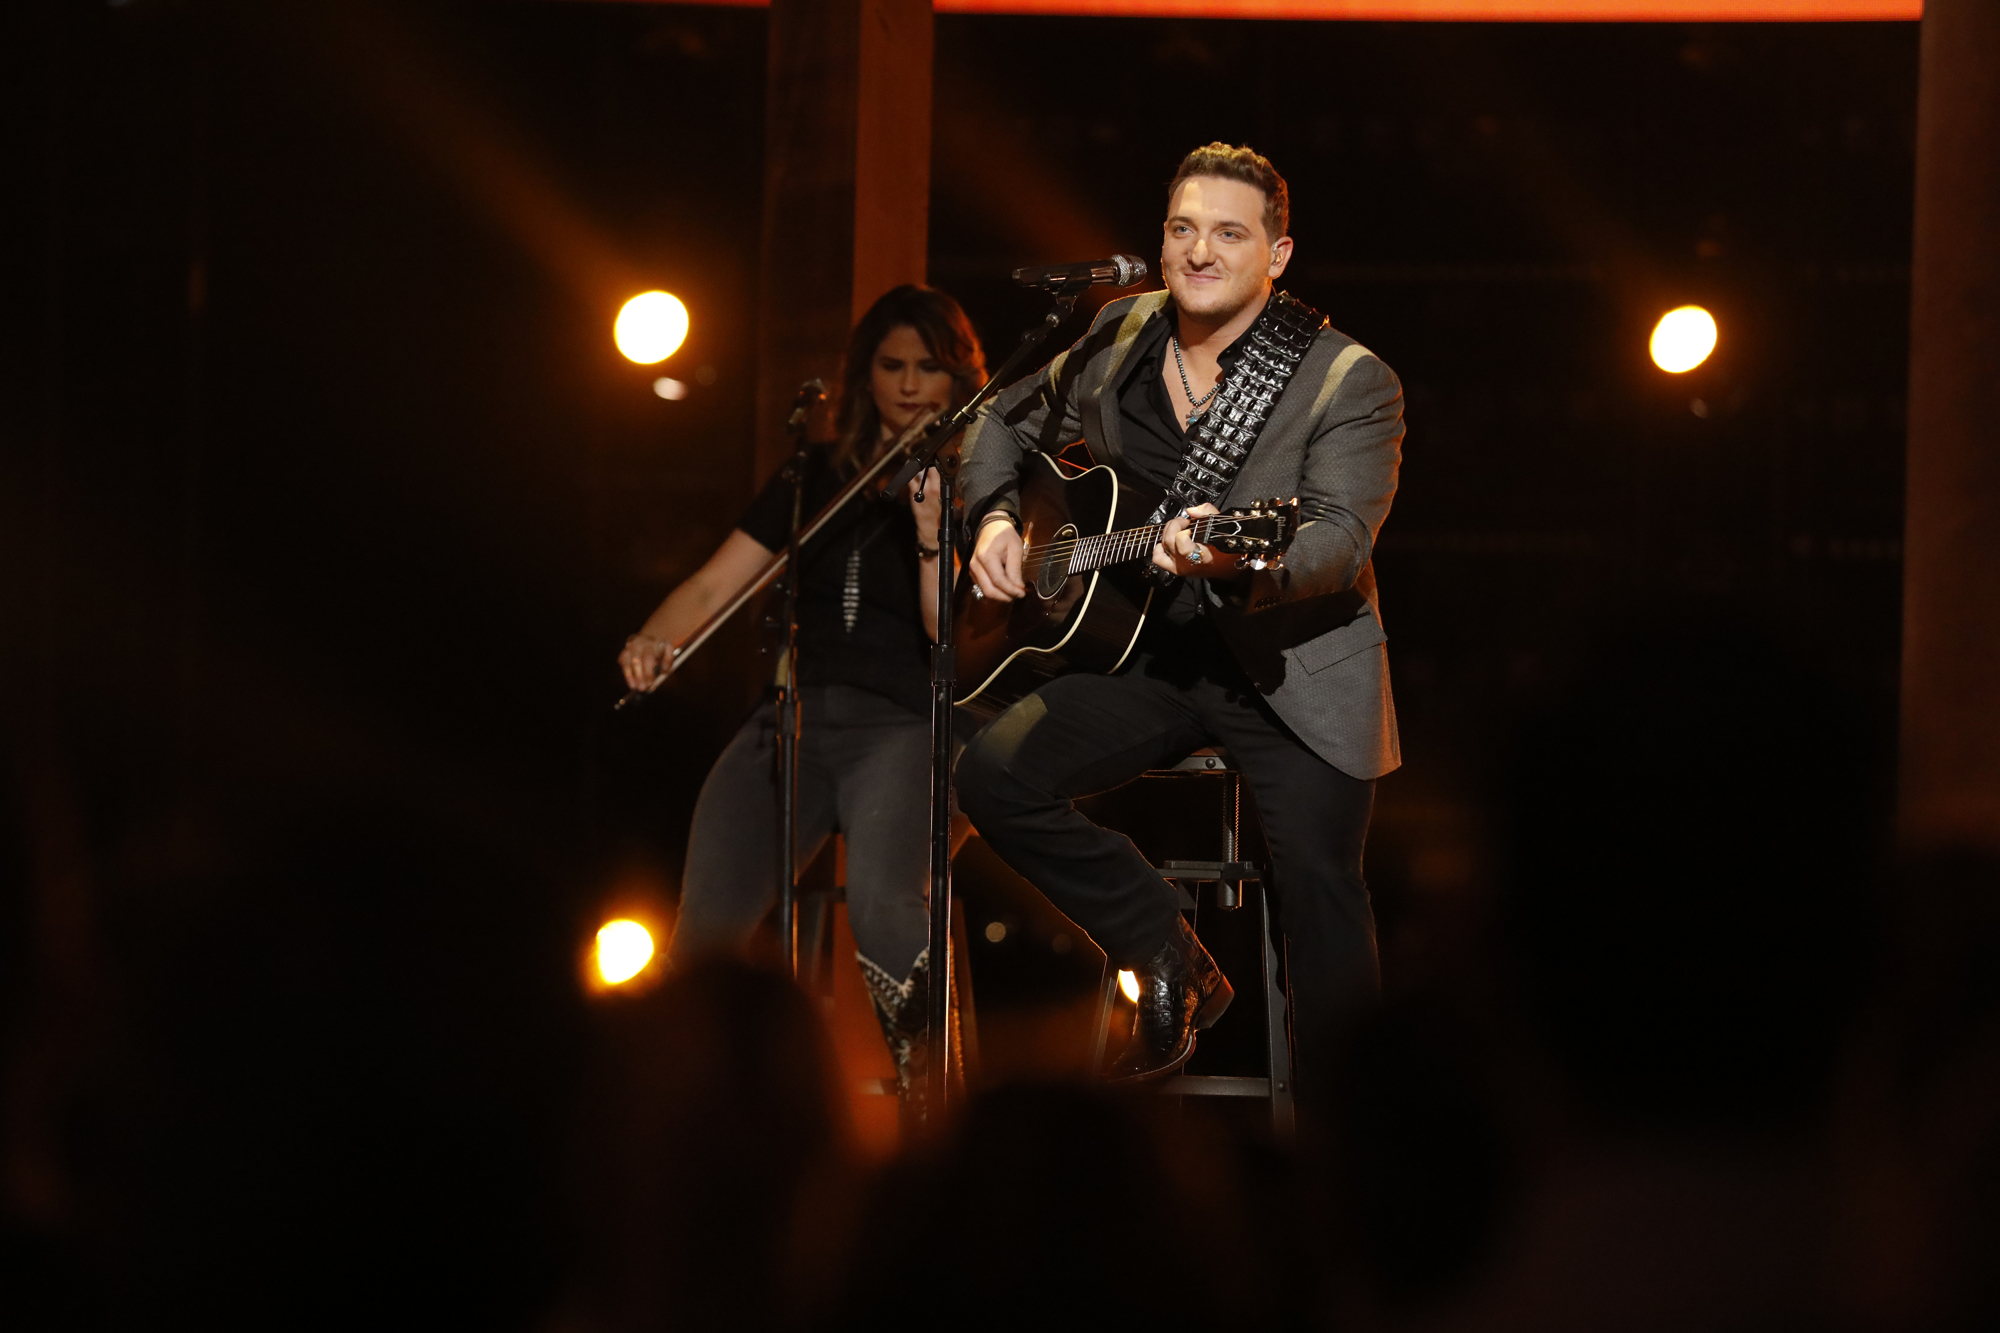 Kaleb 'Lee' Scharmahorn on The Voice. Photo courtesy of NBCUniversal Television